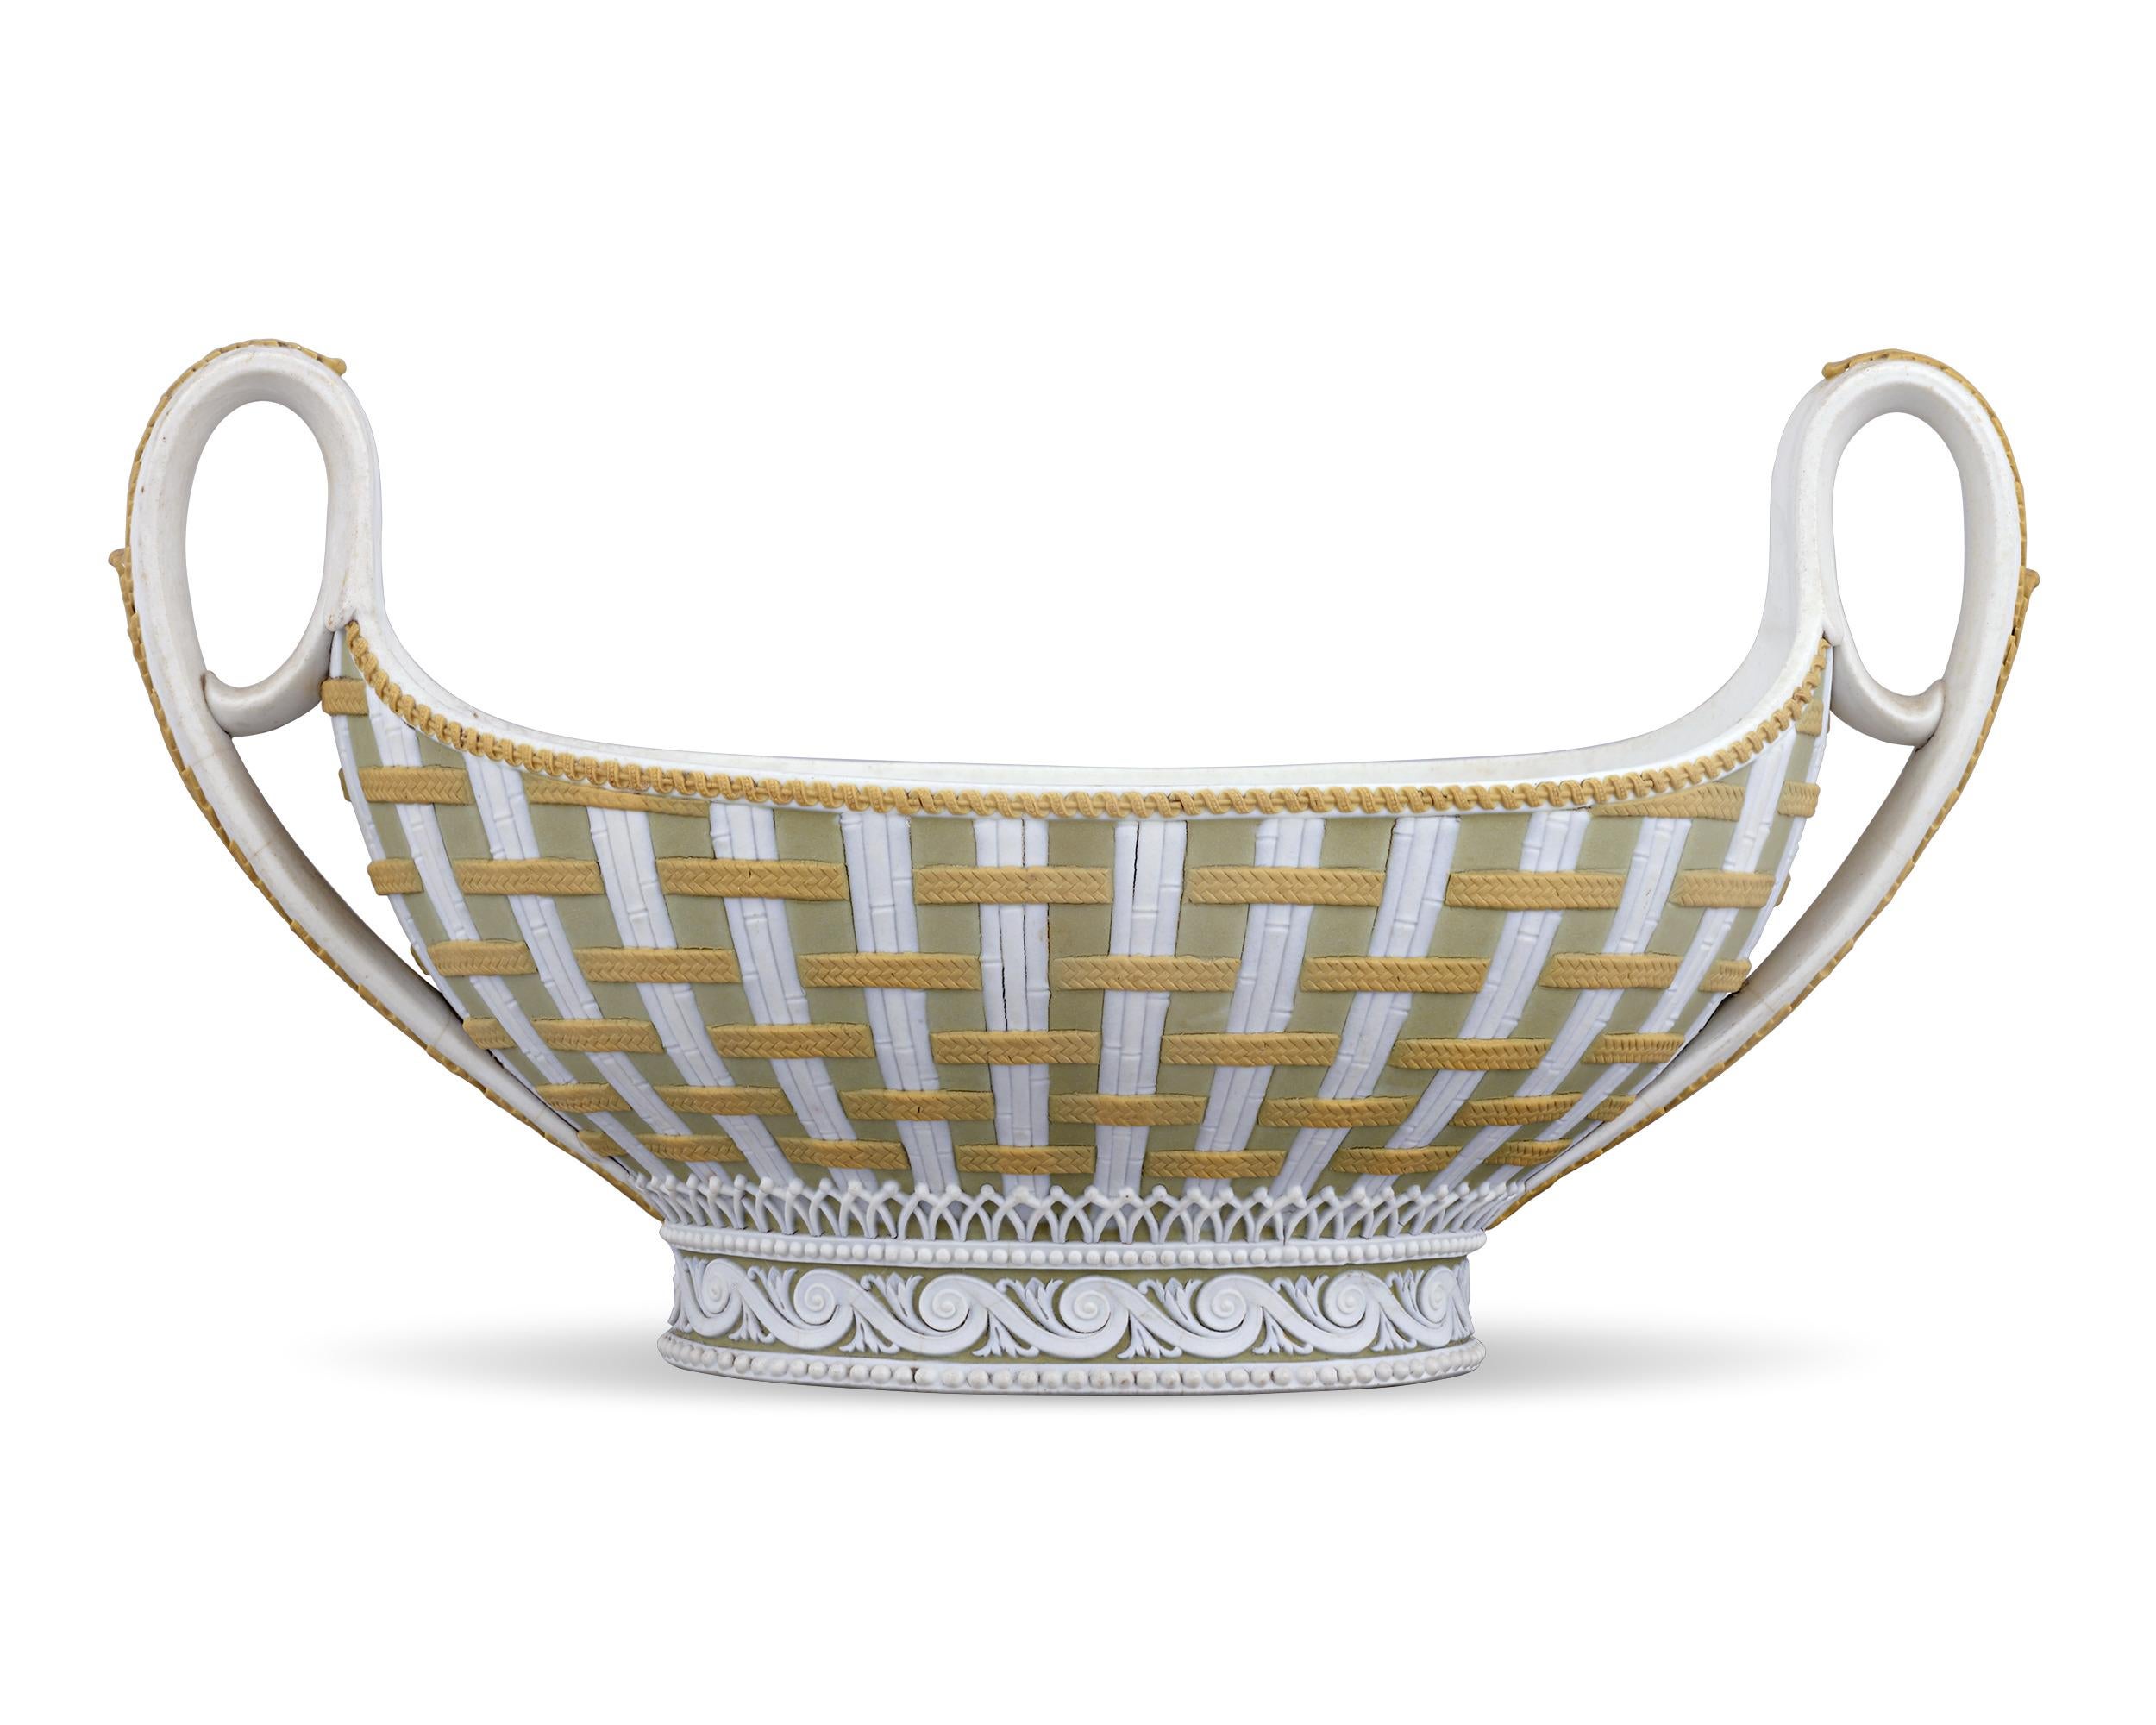 This exquisite Wedgwood sauceboat is crafted of tricolor jasperware, one of the firm's rarest creations. The sauceboat's classic form displays a beautifully woven pattern of white bamboo interlaced with cane-yellow strapwork reserved on sage green.